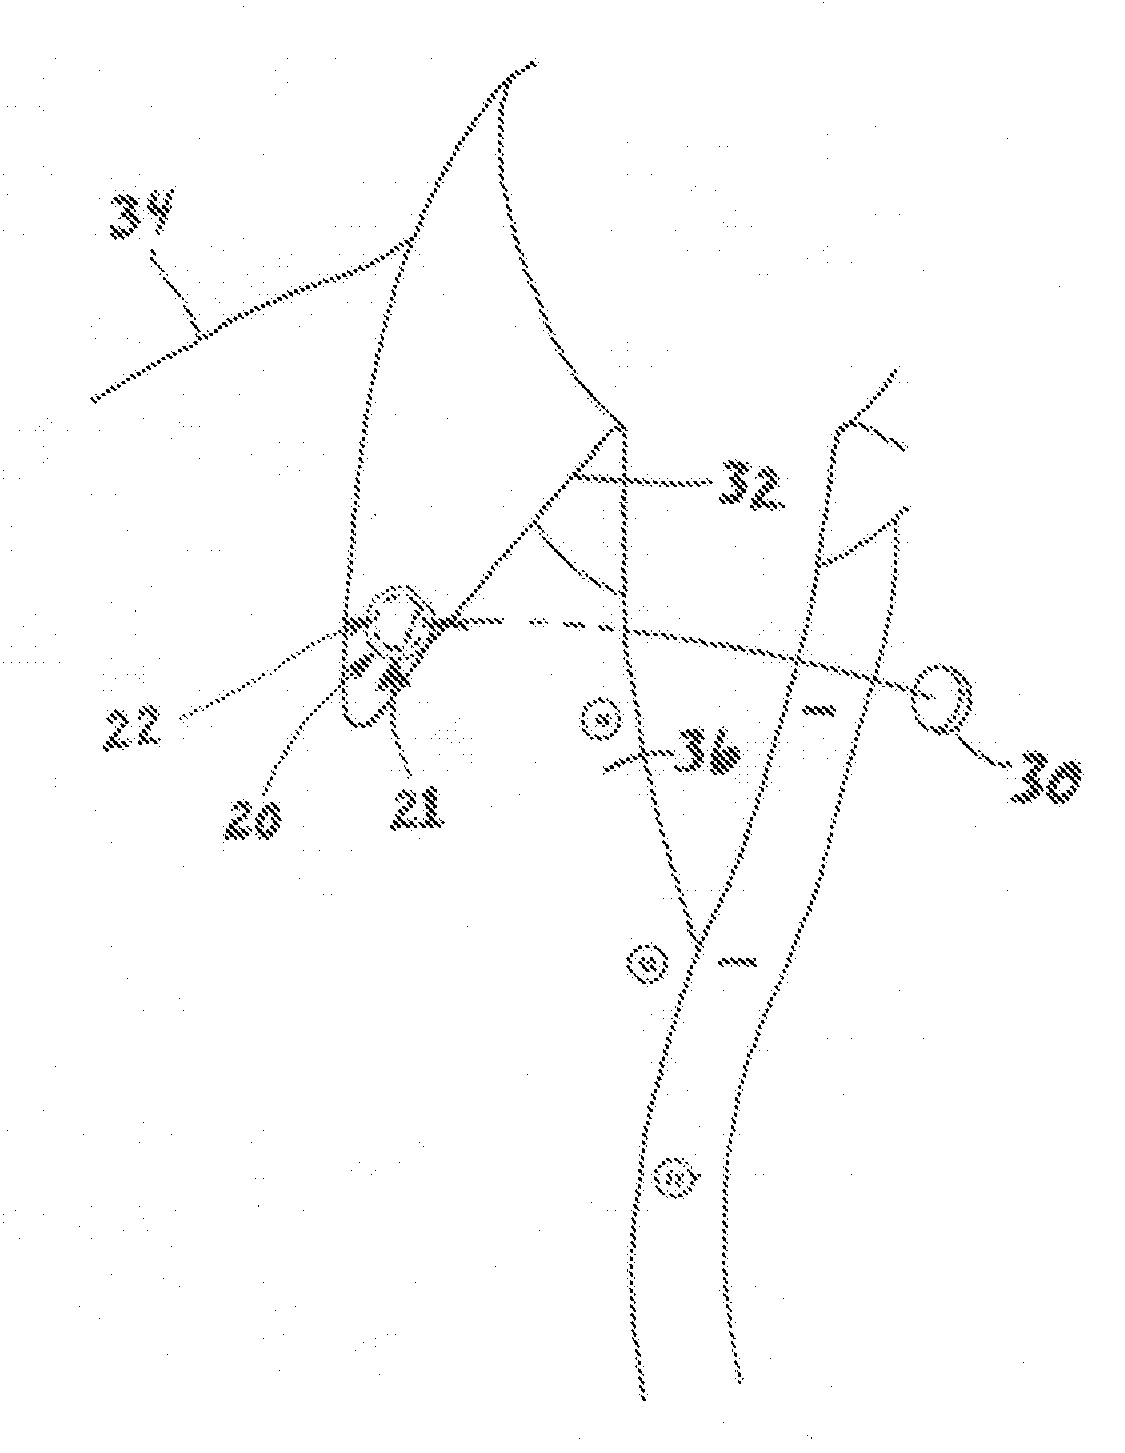 Method and apparatus for keeping a shirt collar aligned and secured, magnetically, against a shirt front, with a decorative collar link assembly